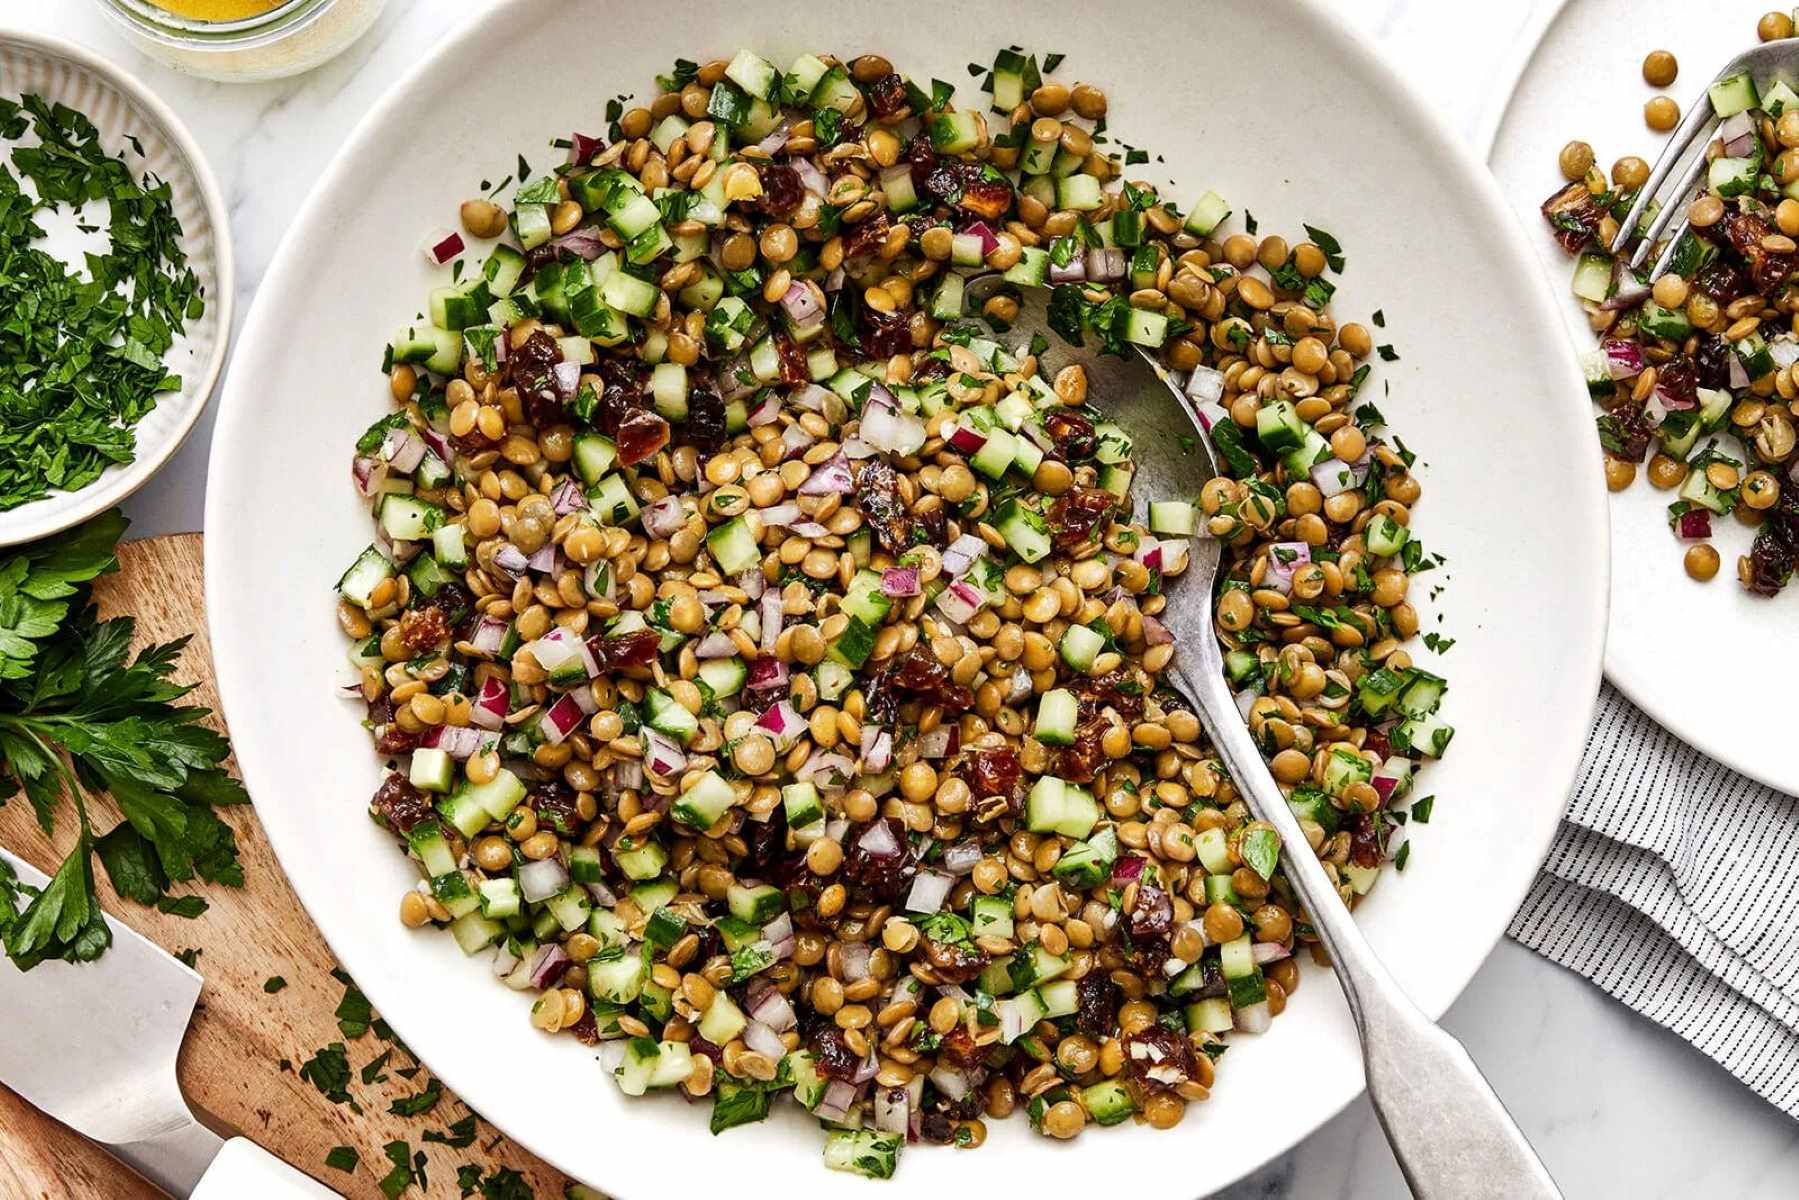 Superfood Lentils: A Delicious And Nutritious Addition To Your Friday Foodie Adventures